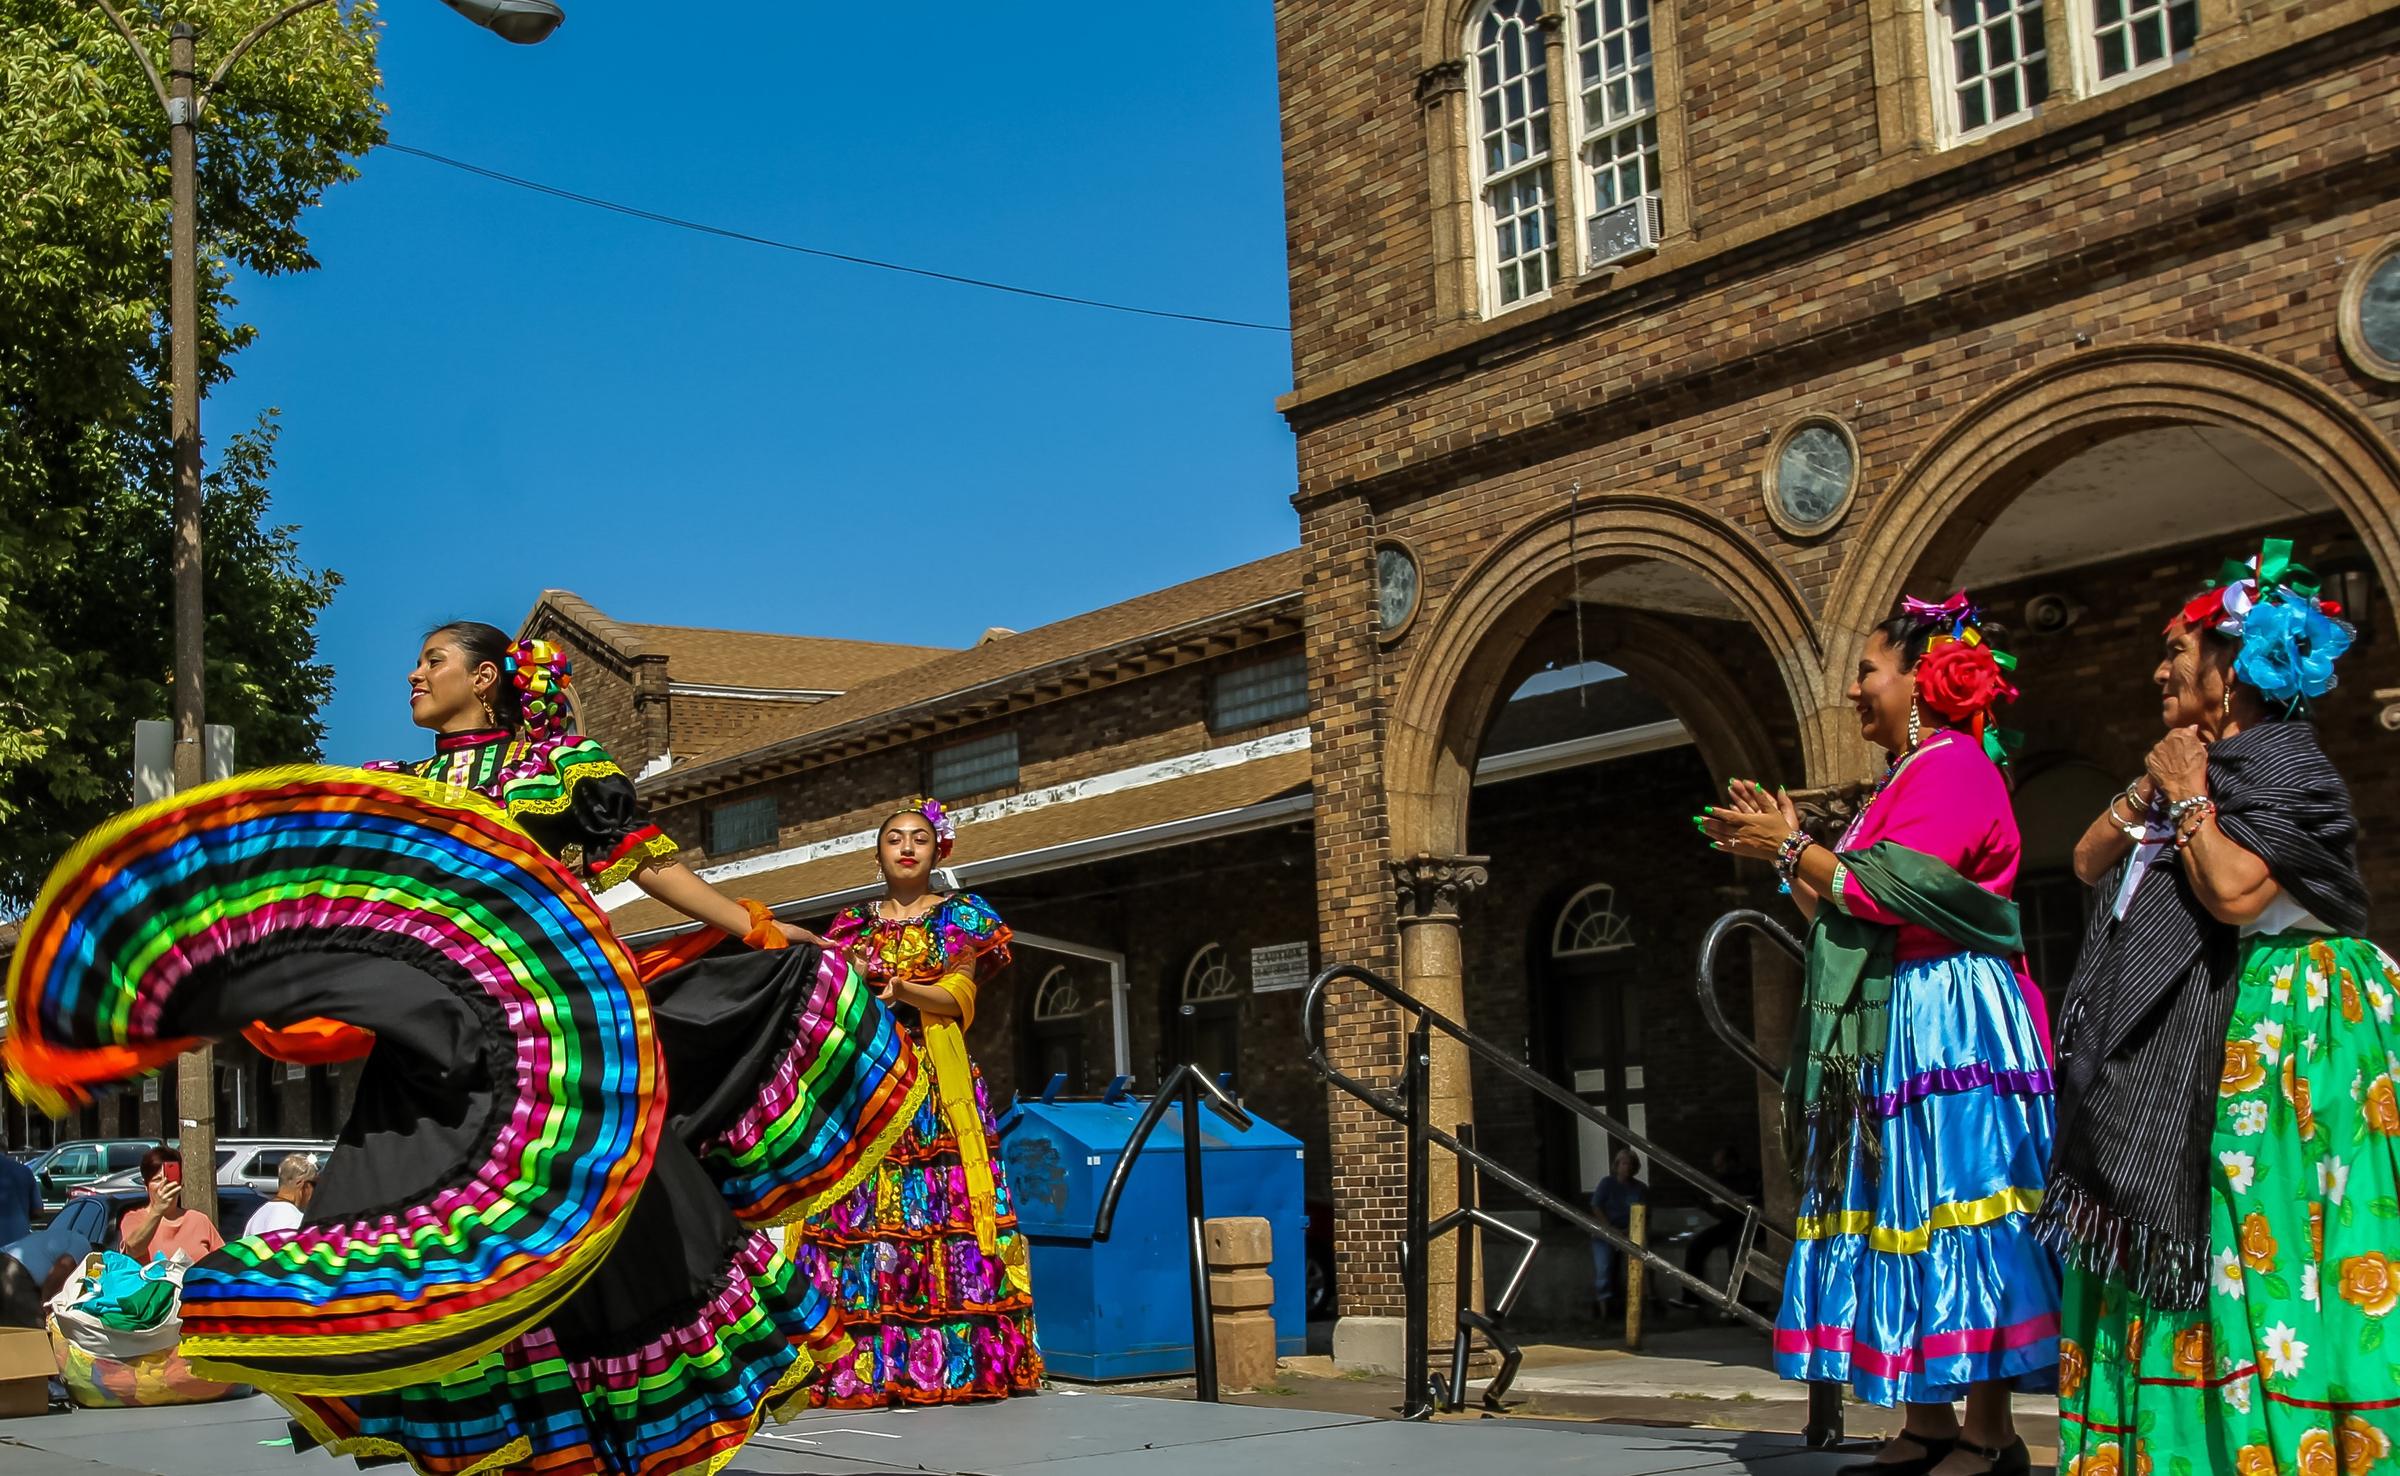 Celebrate Hispanic Heritage Month At These 6 Events In Metro St. Louis